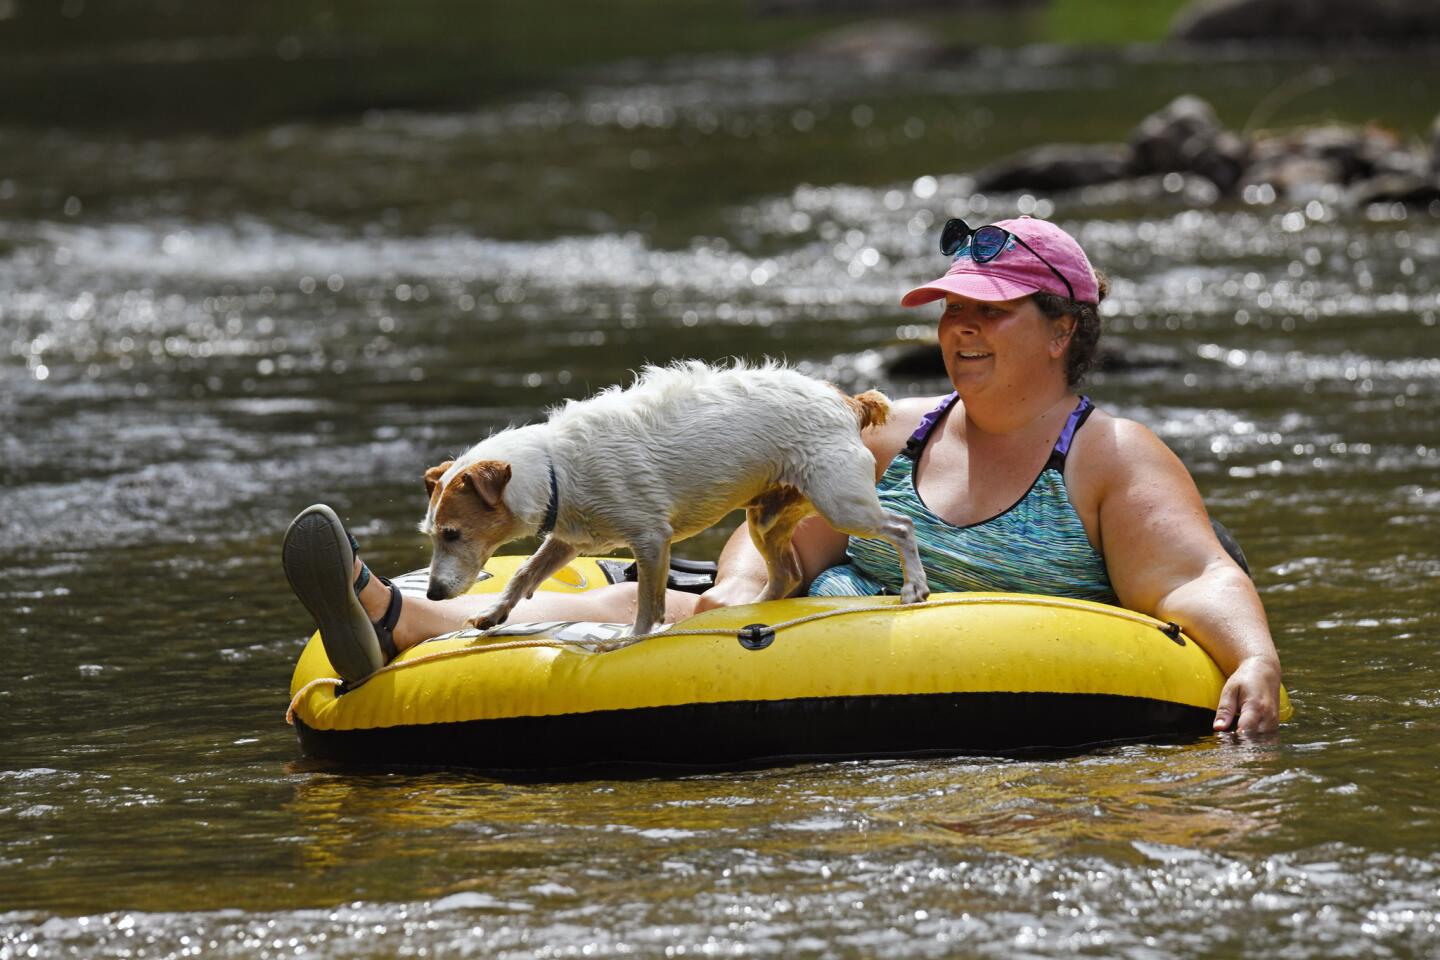 Forest Hill, Md.--August 19, 2019-- "Skampie" the dog from Rising Sun, Md., looks for a spot to slide off the inflatable tube into Deer Creek to cools off from the over 90 degree heat leaving Sally Warner alone on the tube at Rocks State Park.